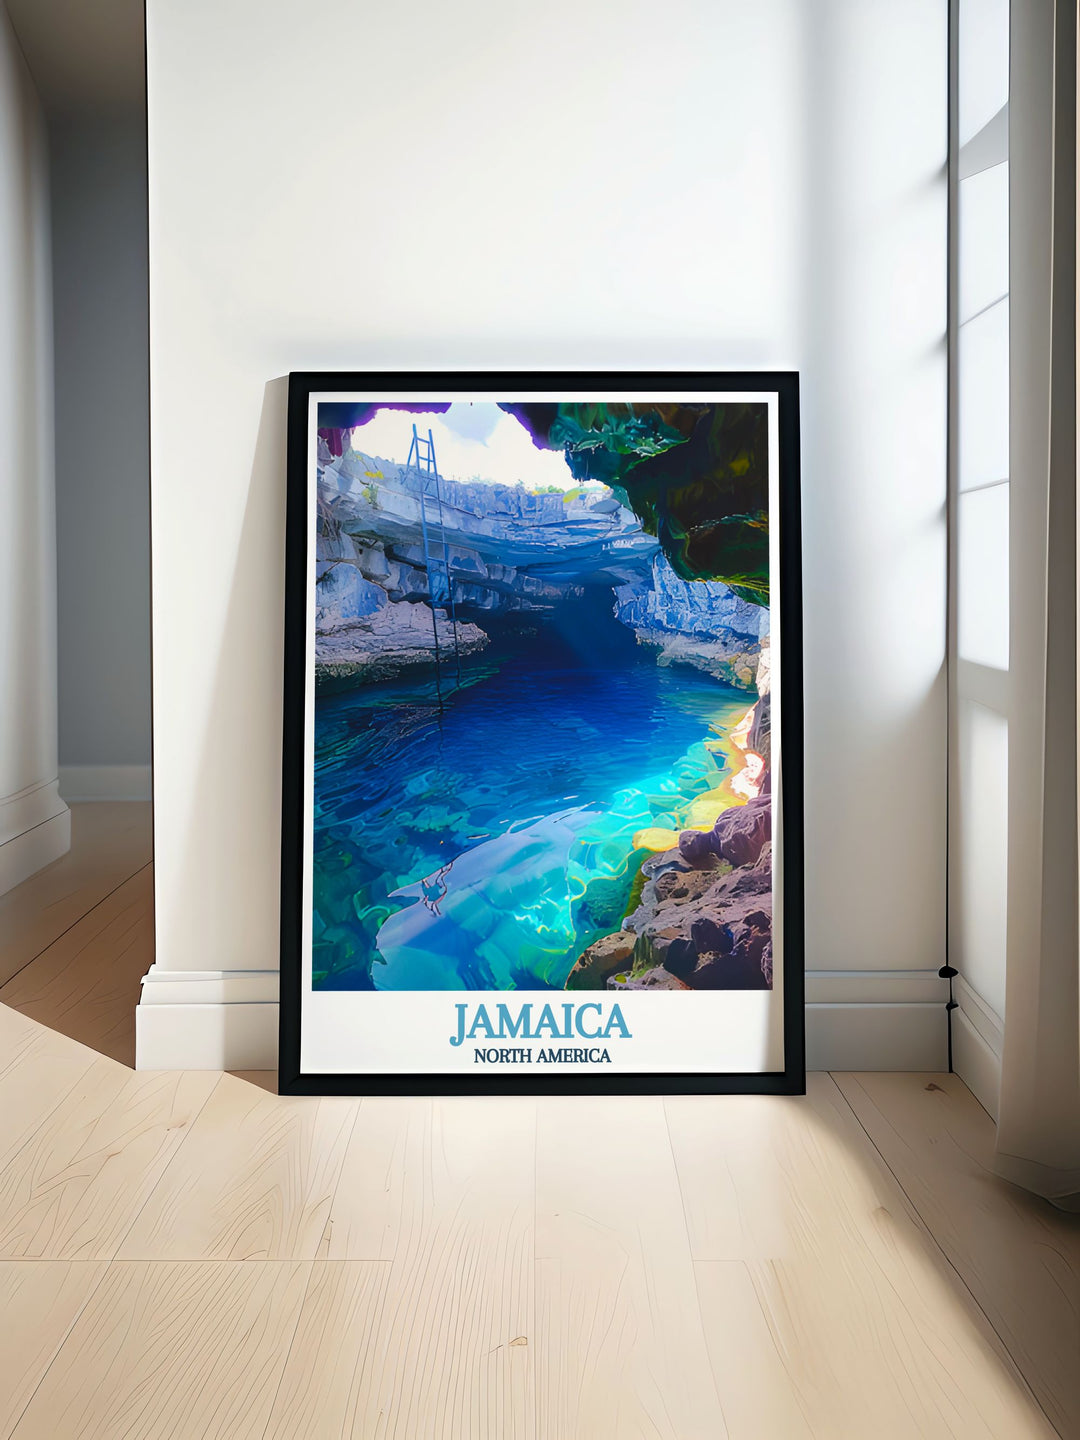 This print features the serene Blue Hole Mineral Spring in Jamaica, bringing the peaceful and refreshing ambiance of the island into your home decor.